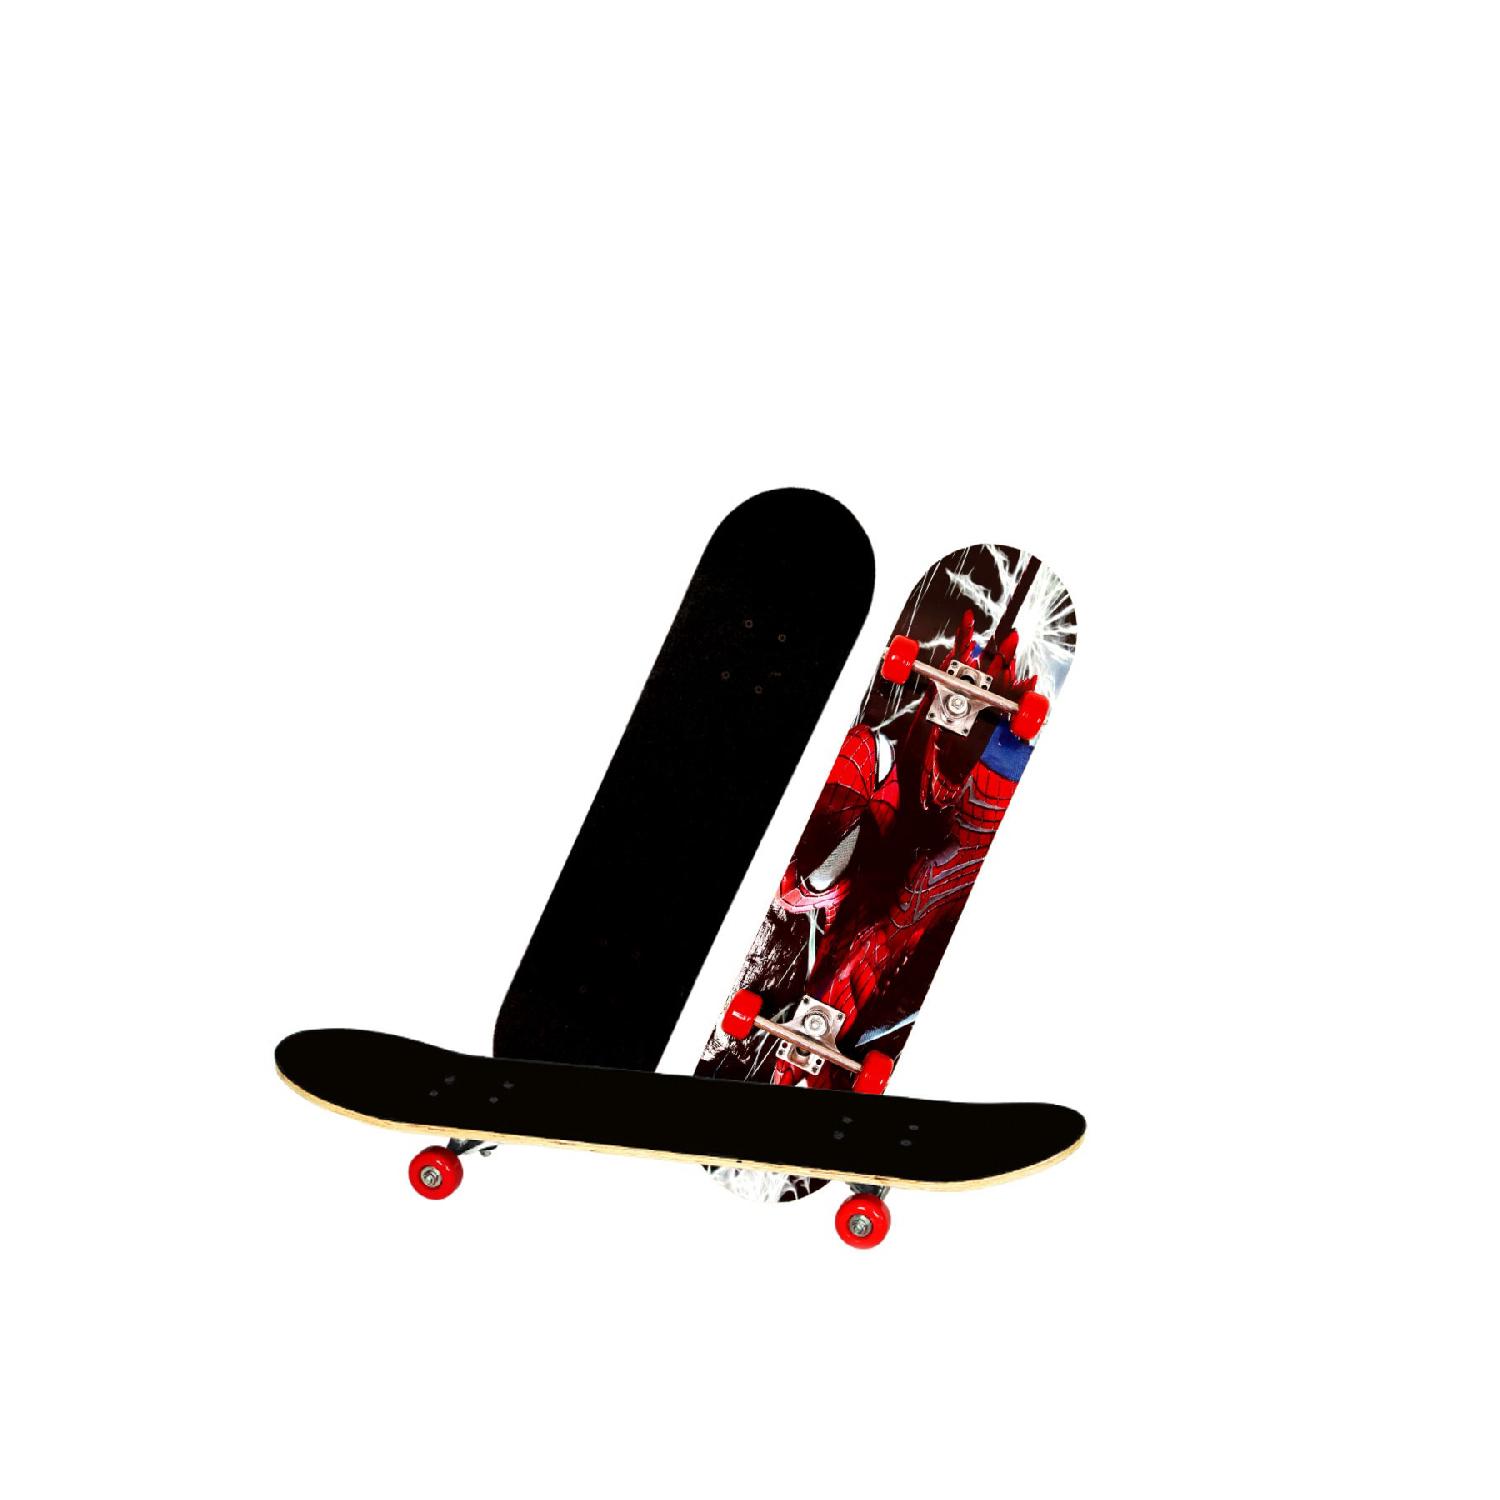 Palmiye istanbul 80cm Wooden Skateboard With Sanded Top Non-slip Surface